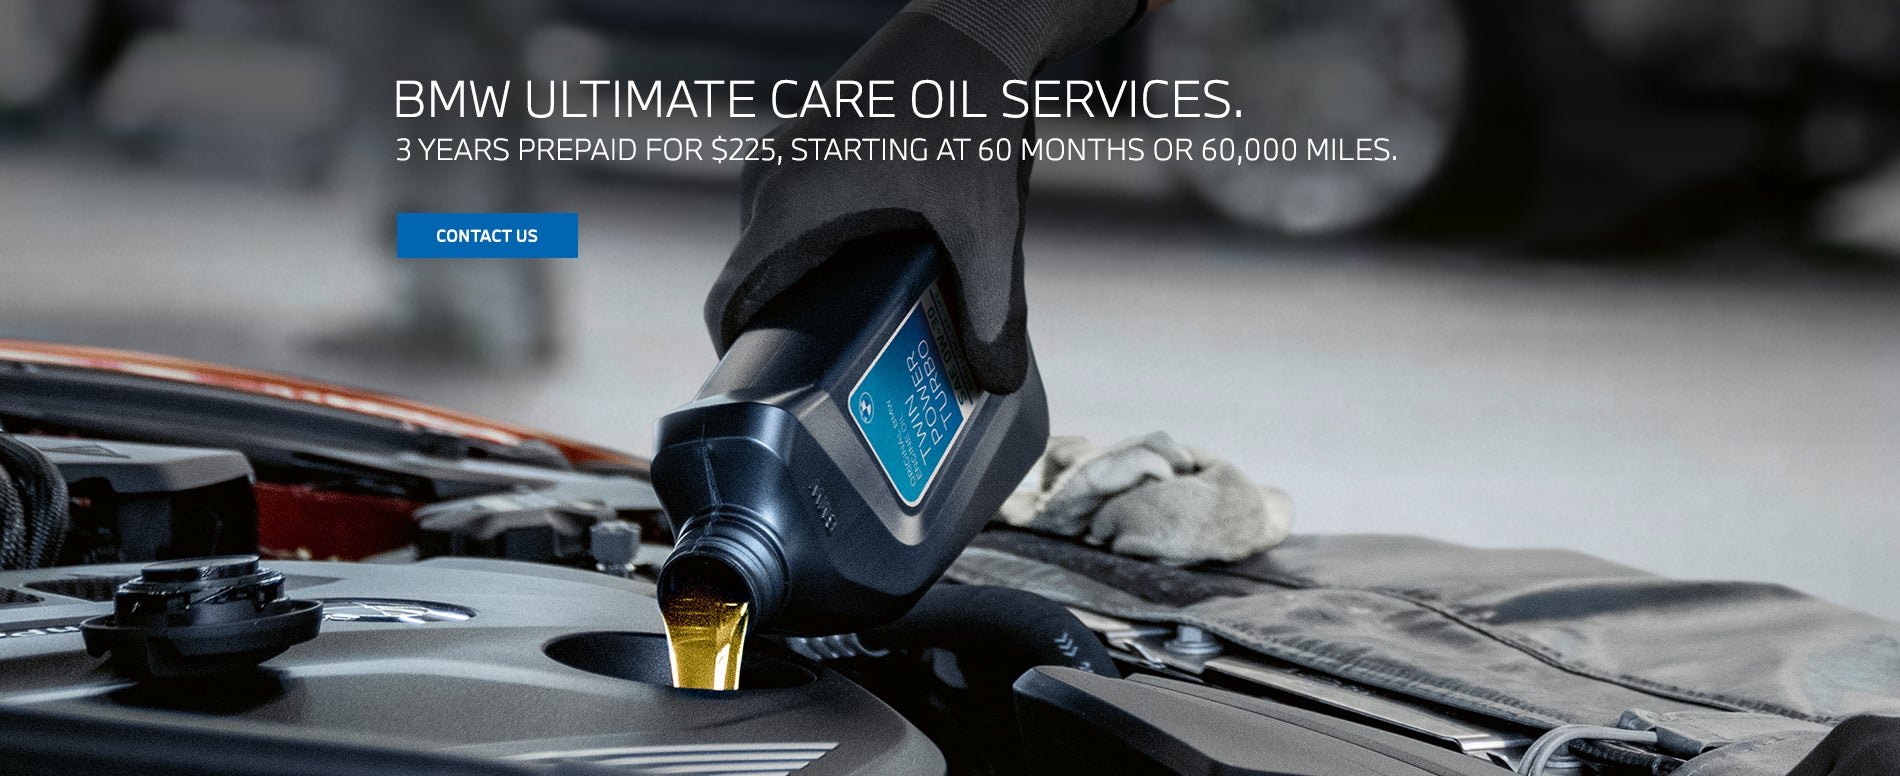 BMW Ultimate Care Oil Services. 3 Years Prepaid Oil Changes